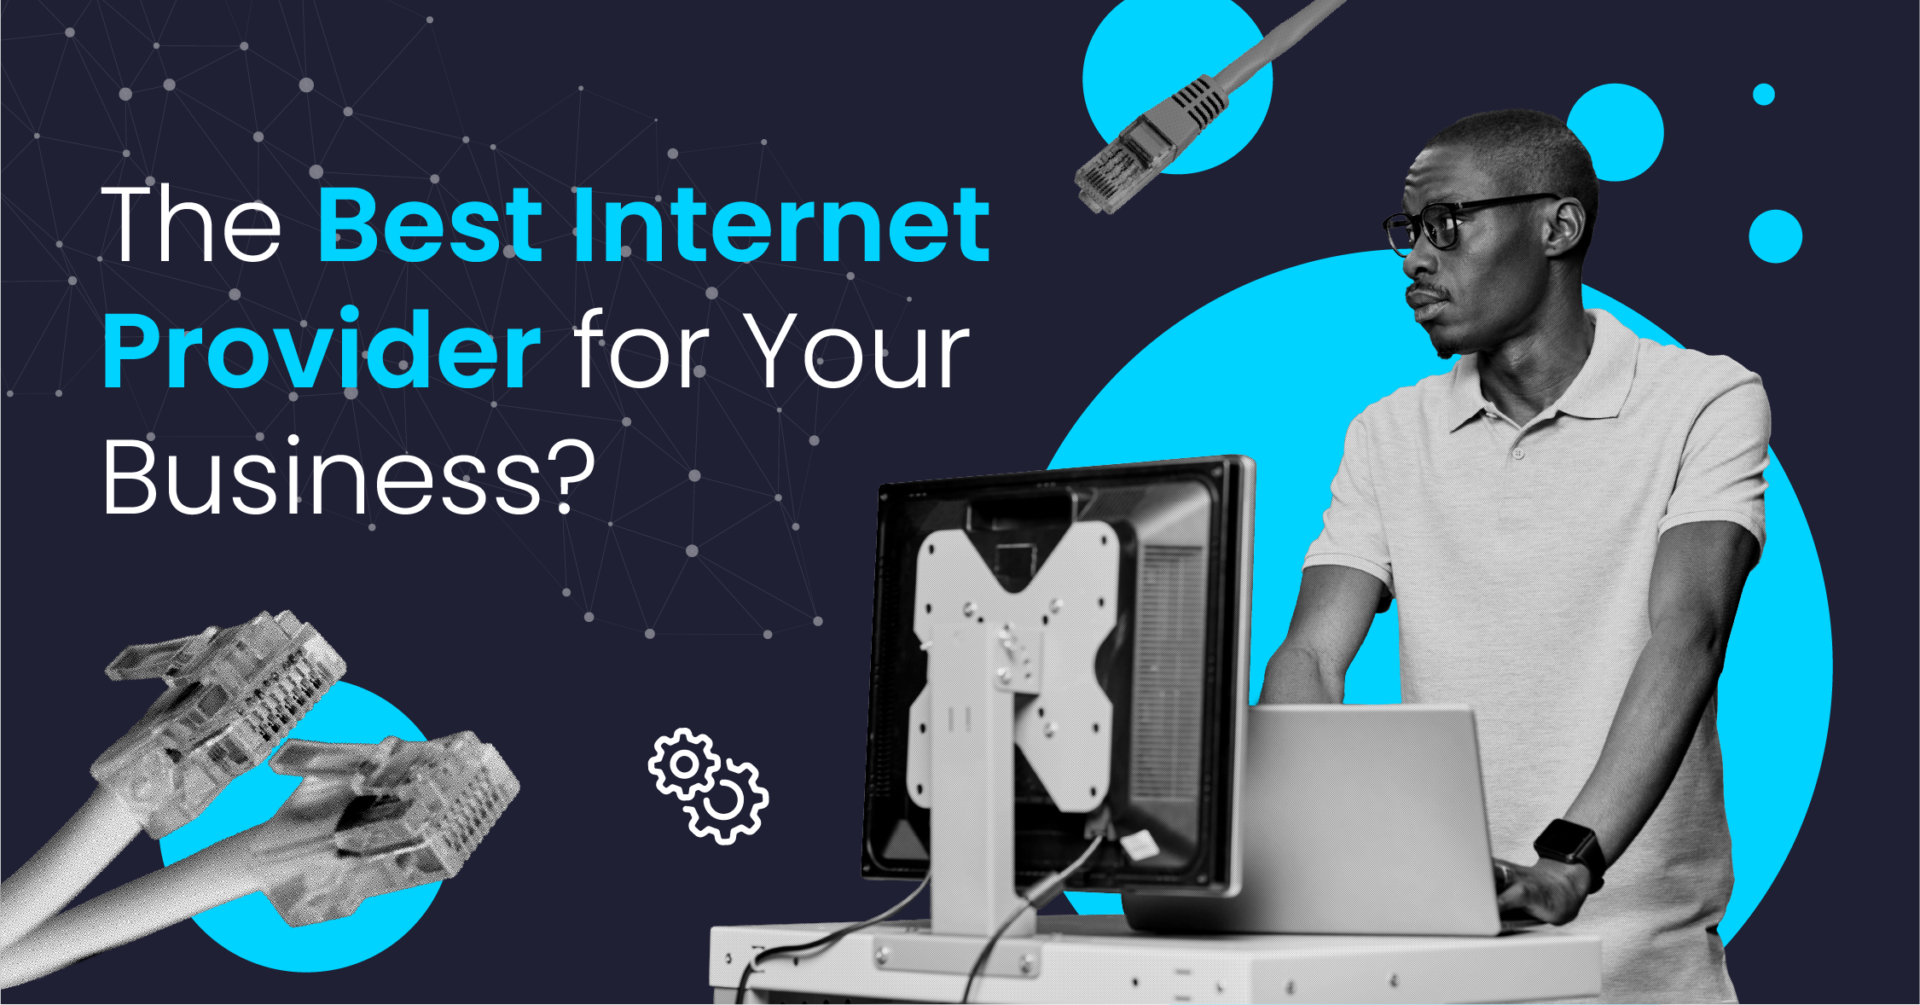 Graphic for a blog post featuring the title 'The Best Internet Provider for Your Business?' prominently displayed in white text on a dark background with blue geometric shapes. To the right, a focused man wearing glasses and a casual polo shirt is working on a laptop, with a large ethernet cable and network switch in the foreground symbolizing connectivity. The overall design conveys a modern, tech-savvy atmosphere.